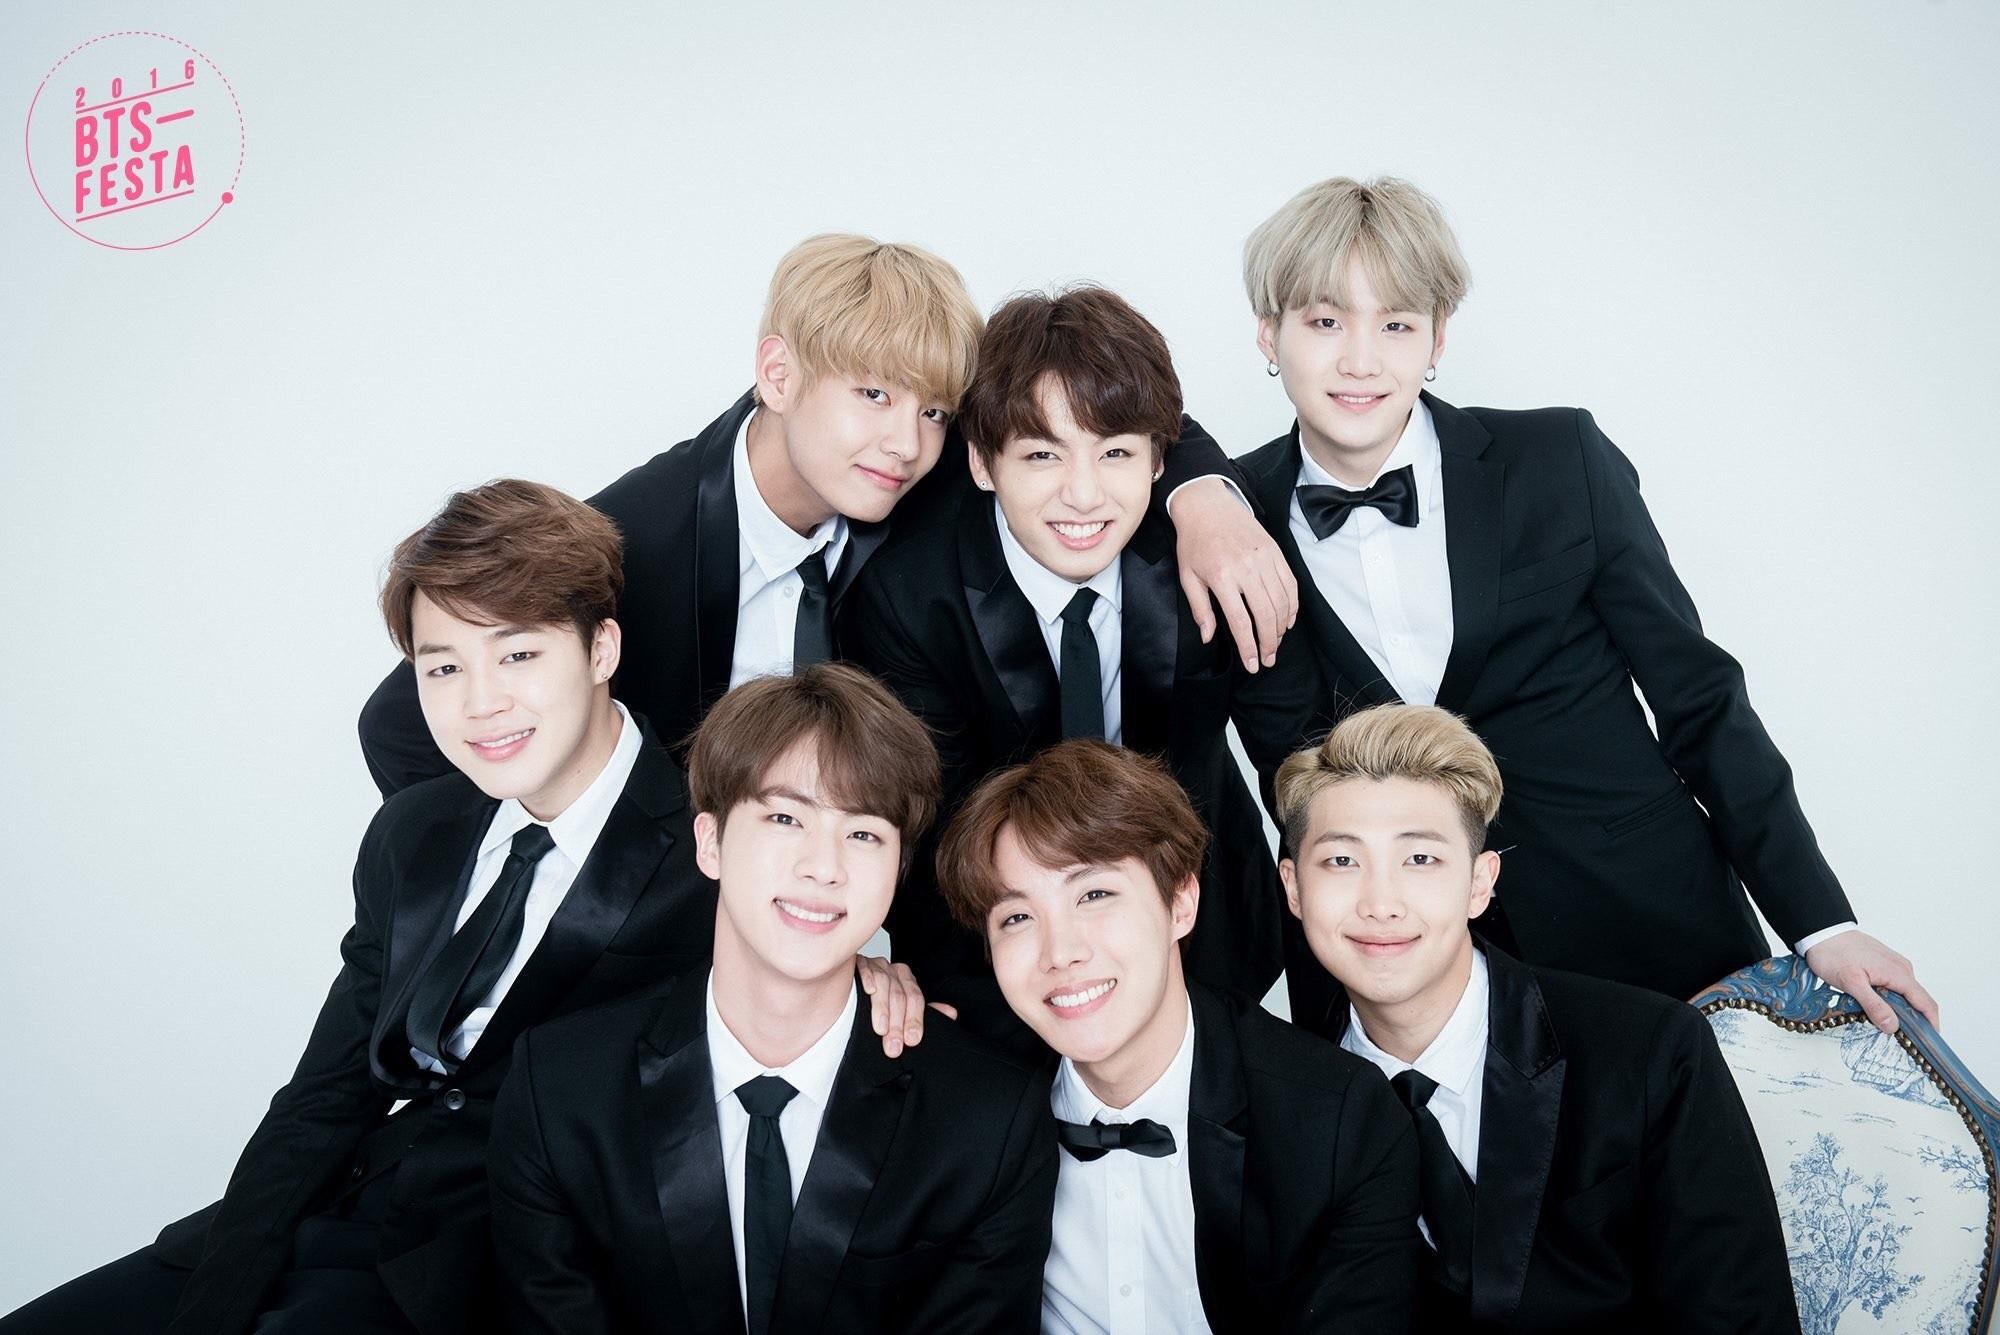 Collection of Bts Wallpaper Desktop (image in Collection)